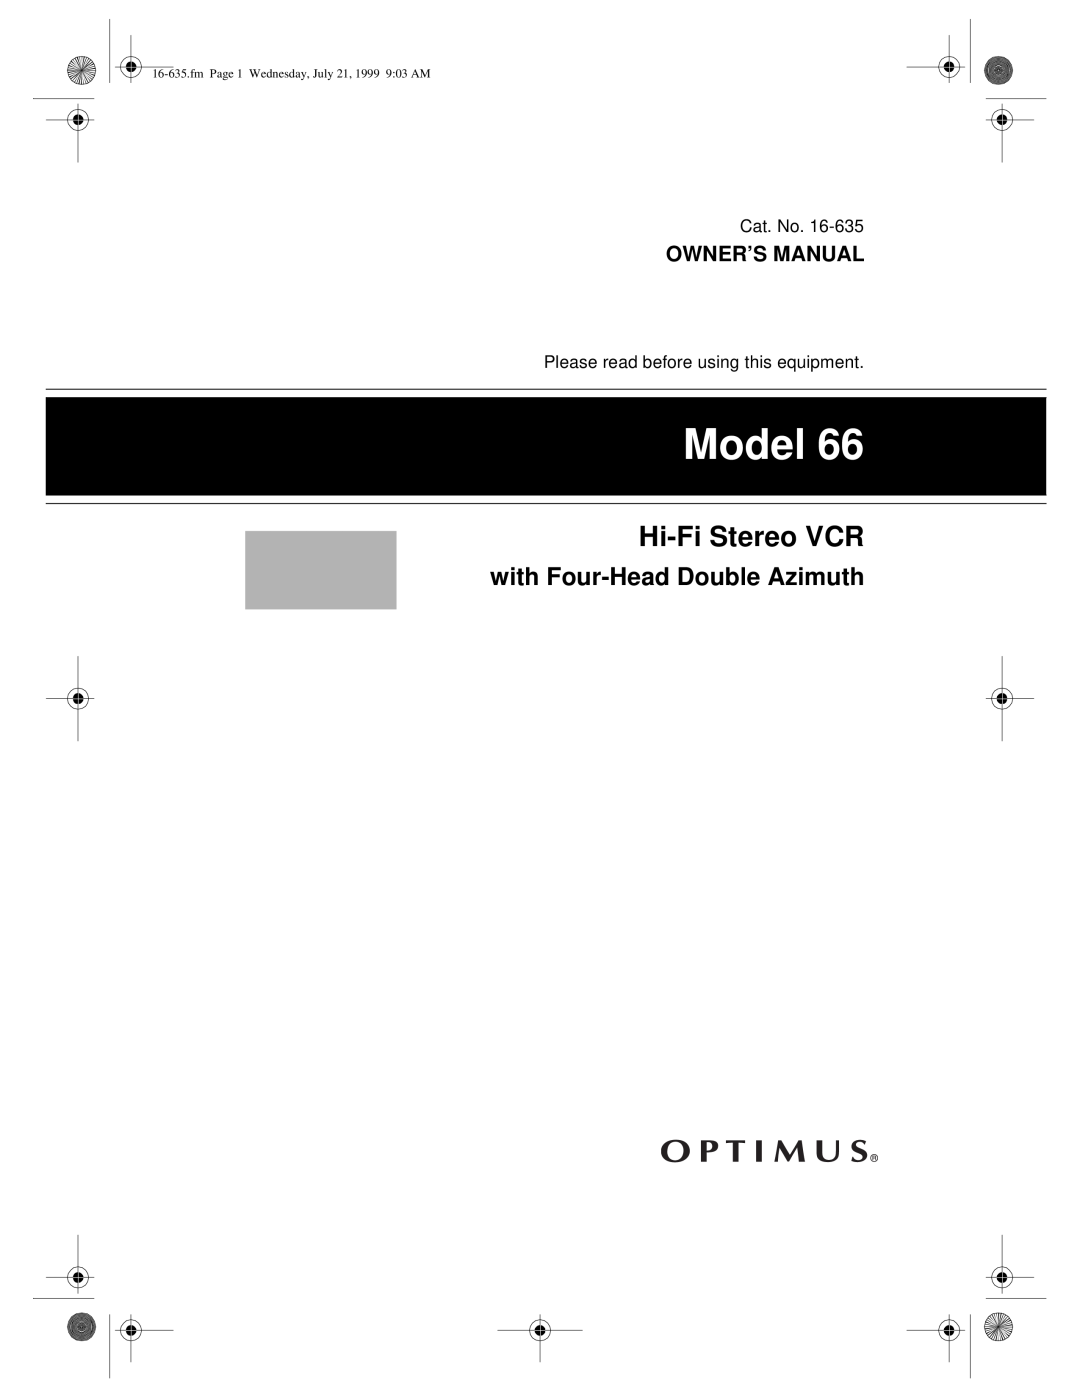 Radio Shack 66 owner manual Hi-Fi Stereo VCR, with Four-Head Double Azimuth, Owner’S Manual, Model 